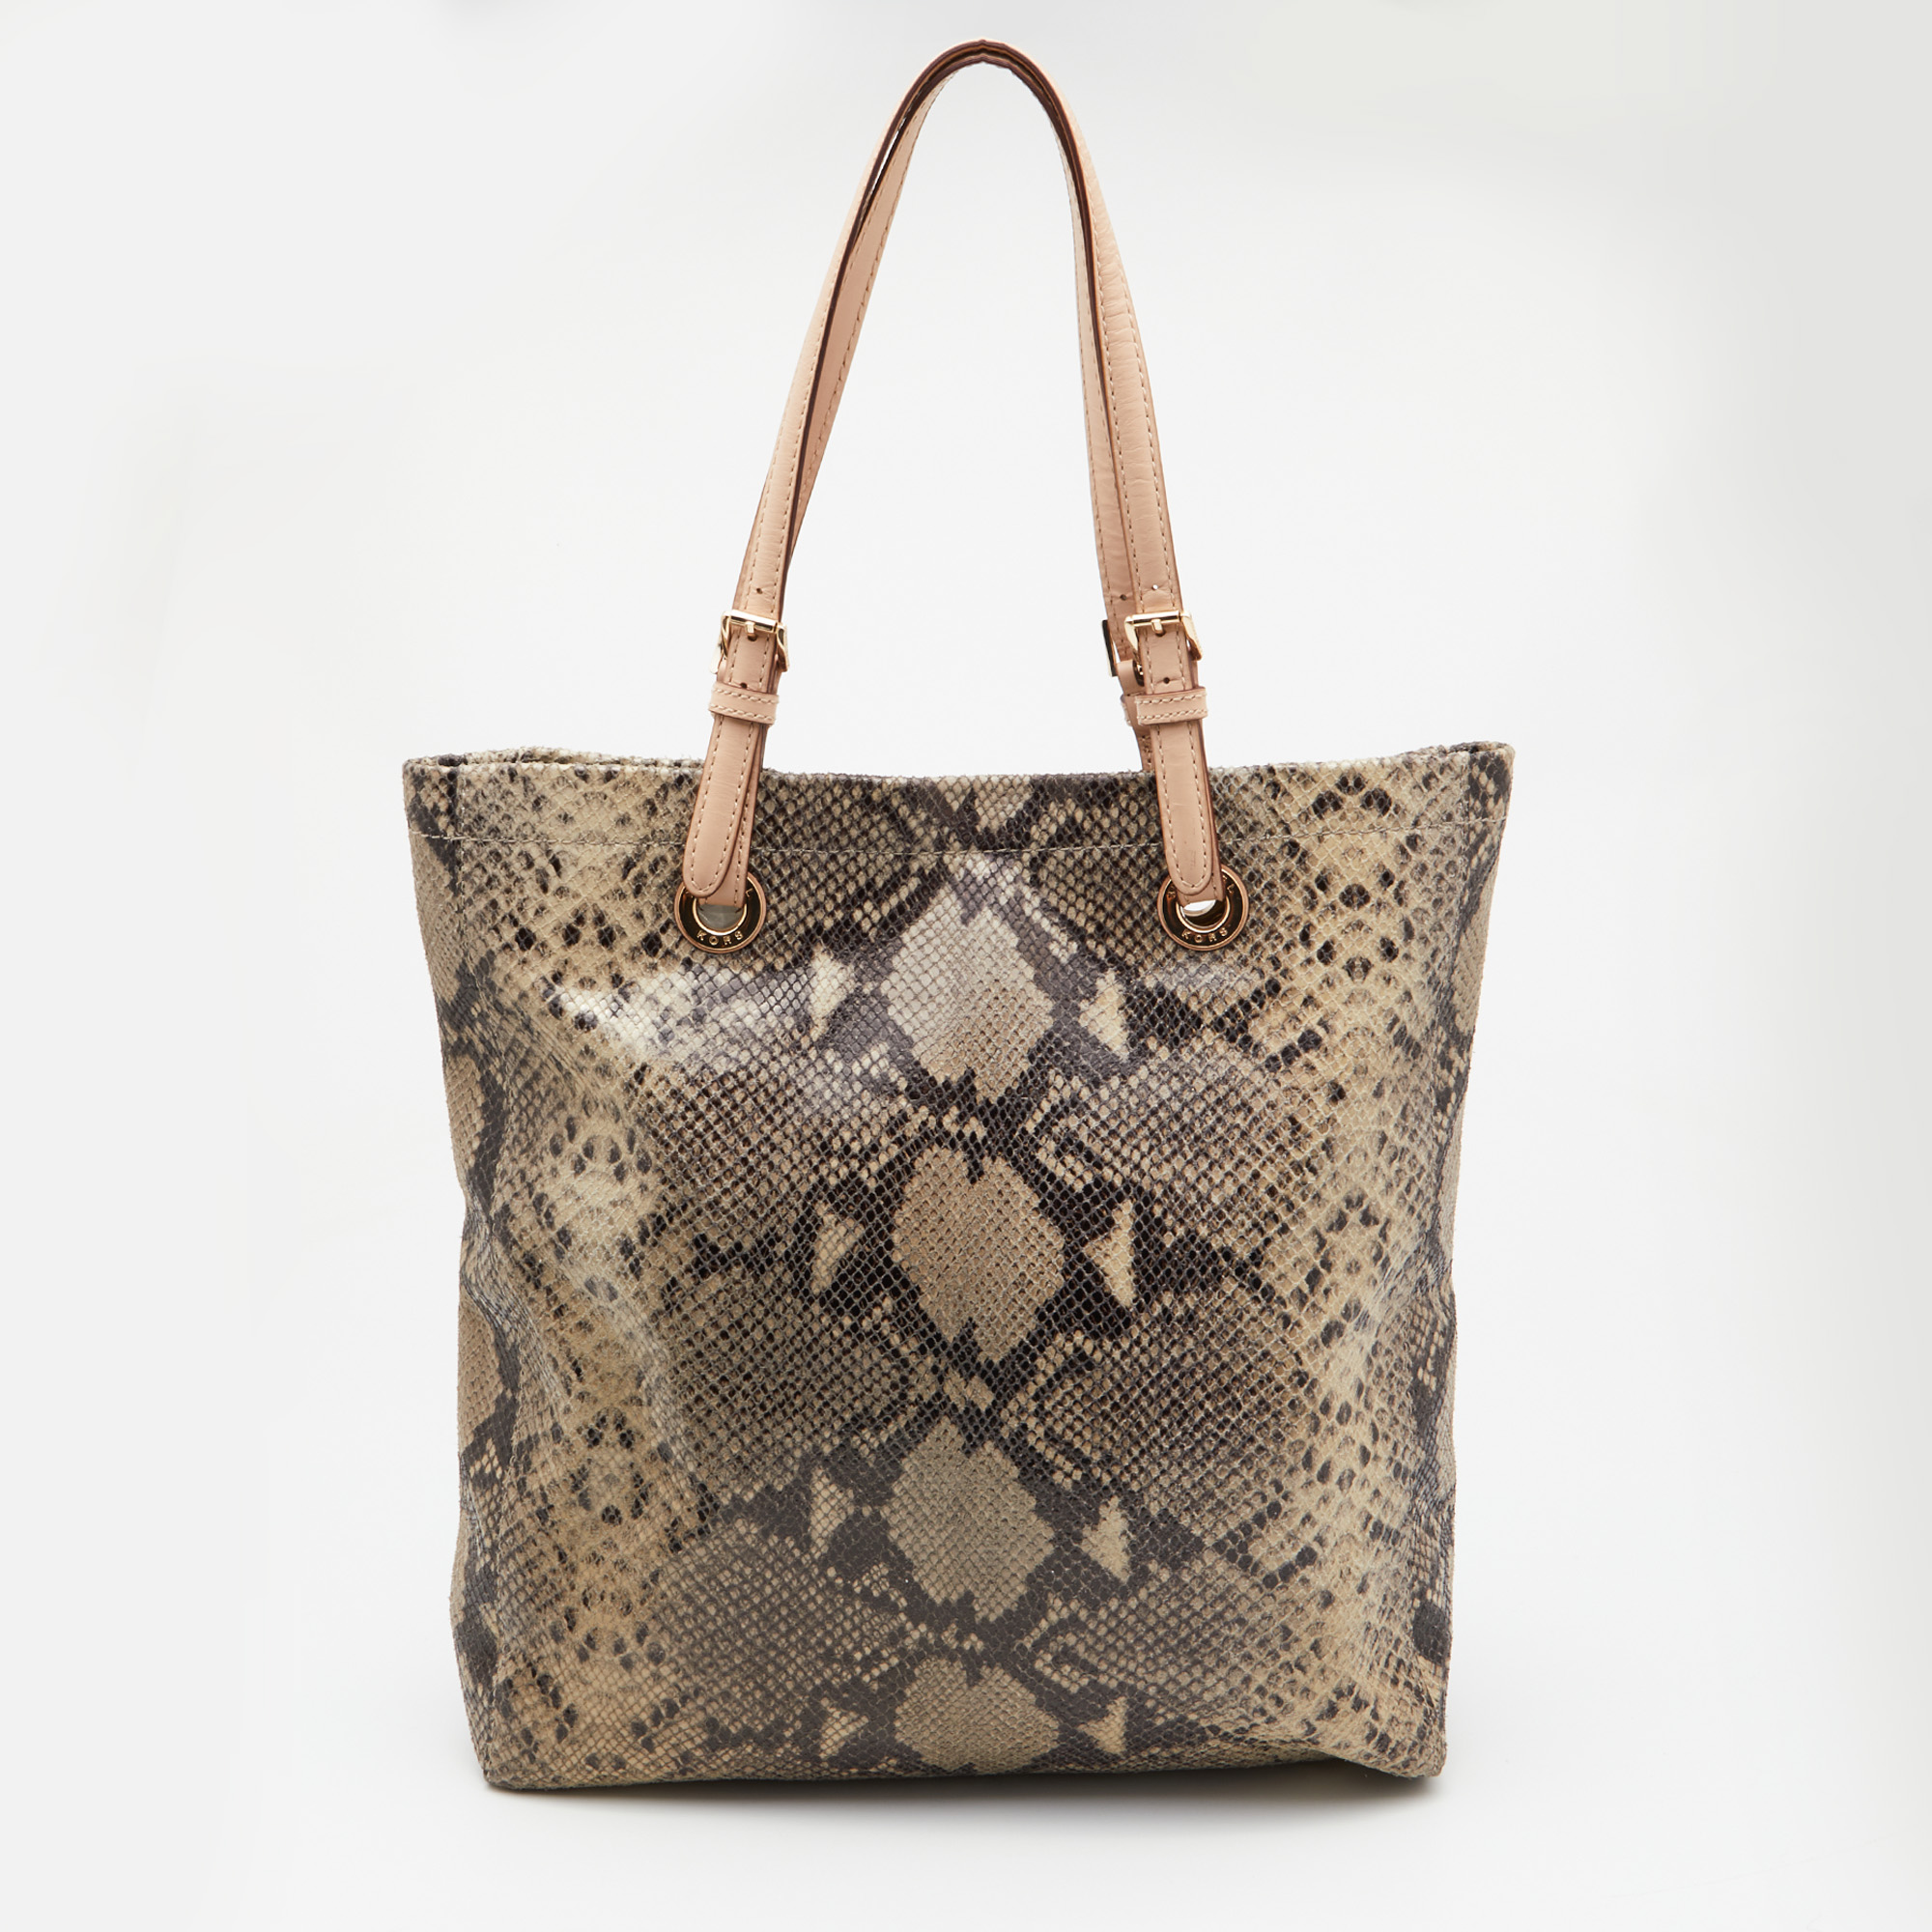 MICHAEL Michael Kors Beige Python Embossed Leather North South Tote